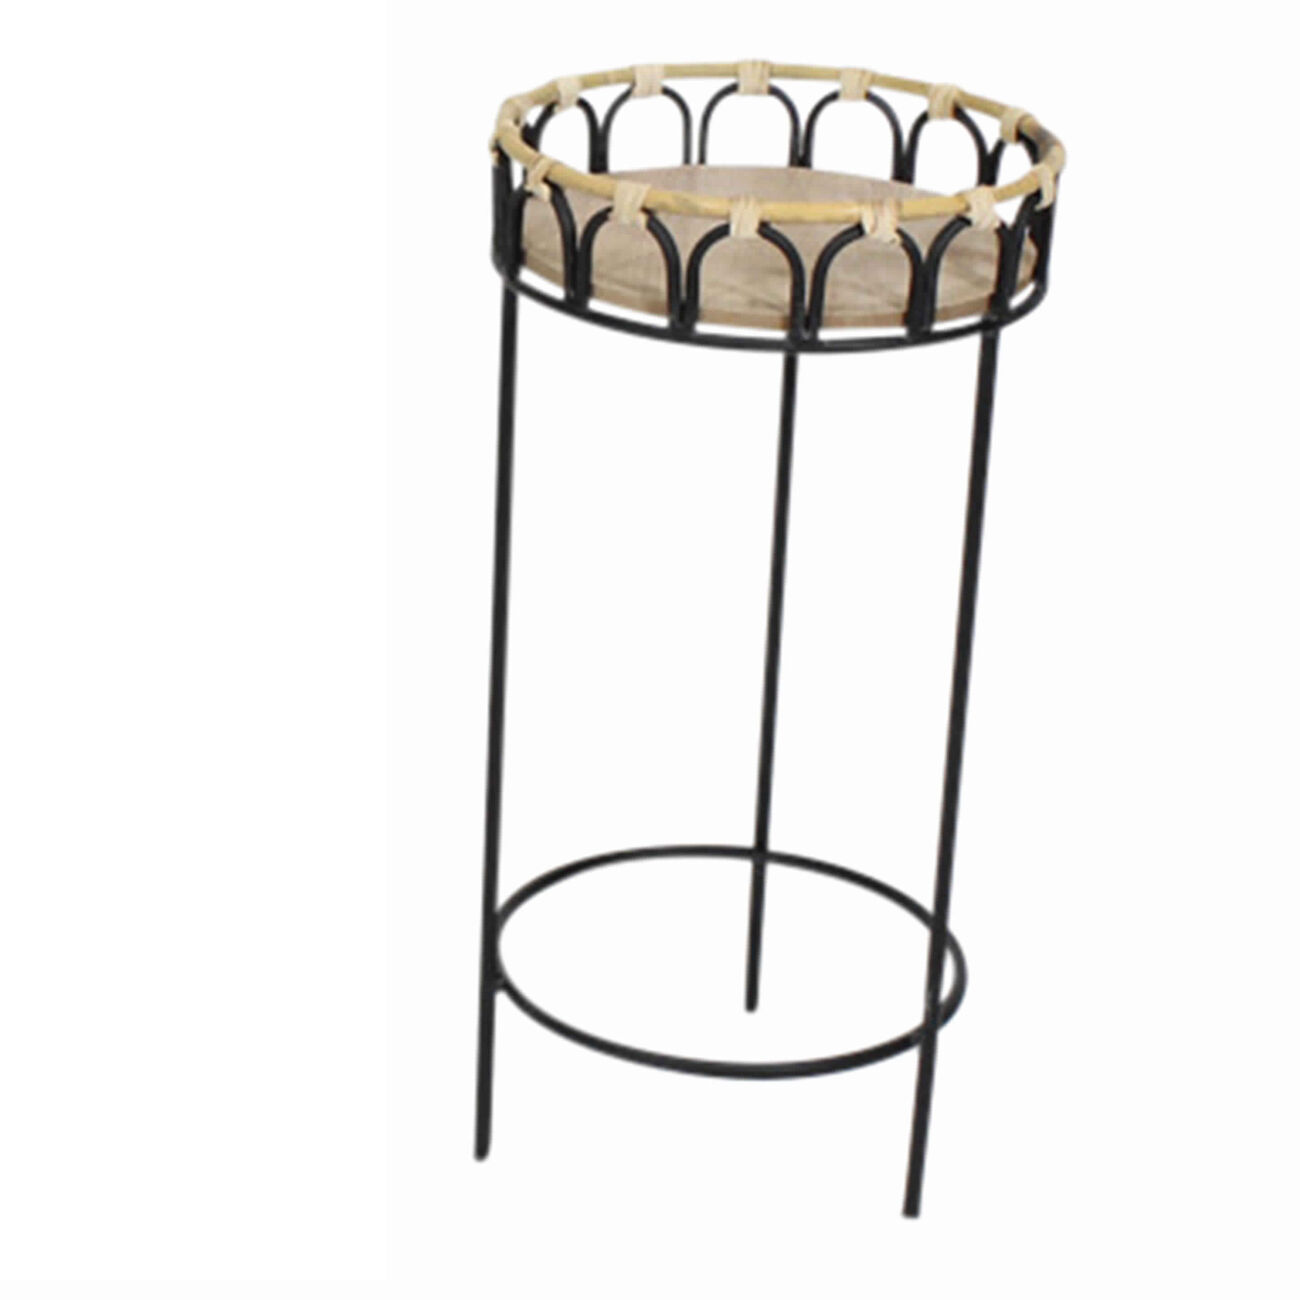 Round Metal Planter Stand with Tubular Legs, Set of 2, Brown and Black